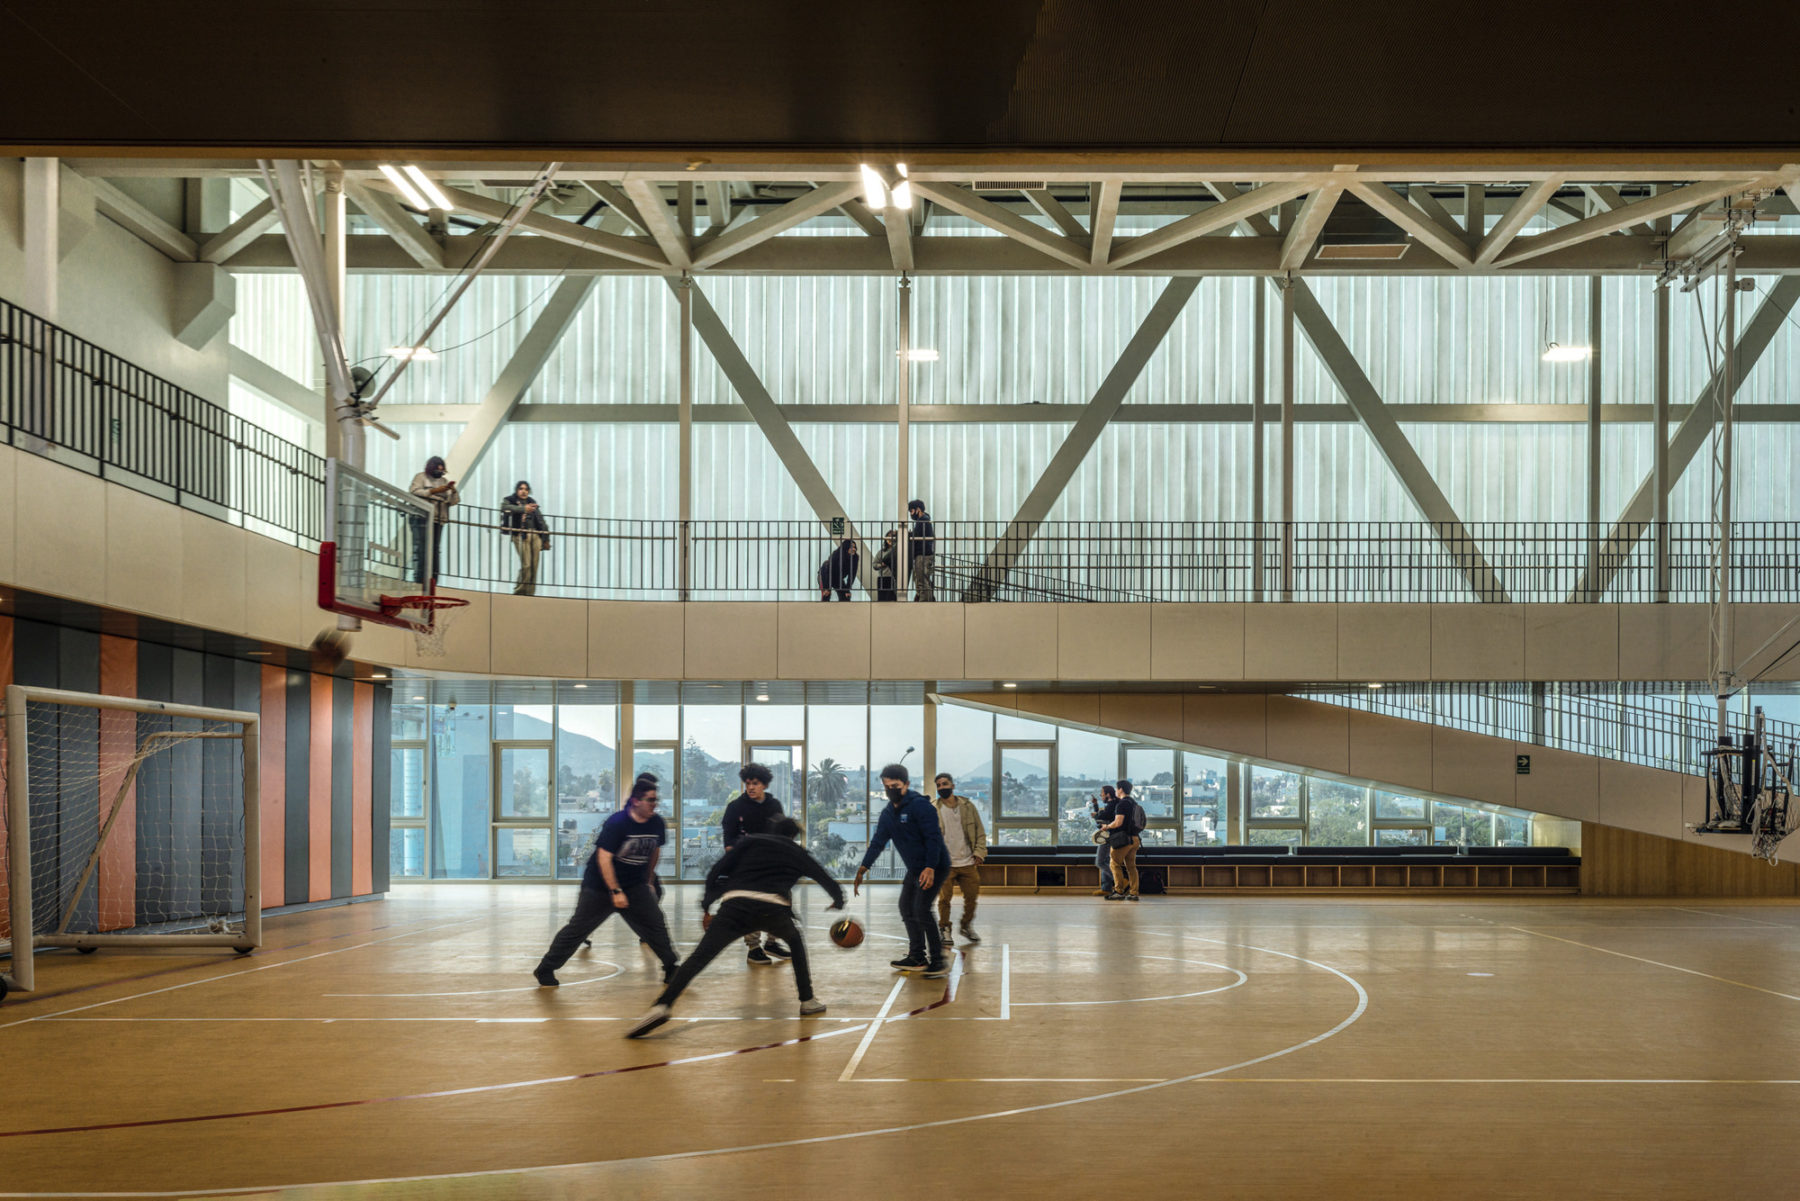 interior photo of gymnasium; a group of students is playing basketball in the foreground, another lounges on a bench near the court, and a third is on a bridge overlooking the court.